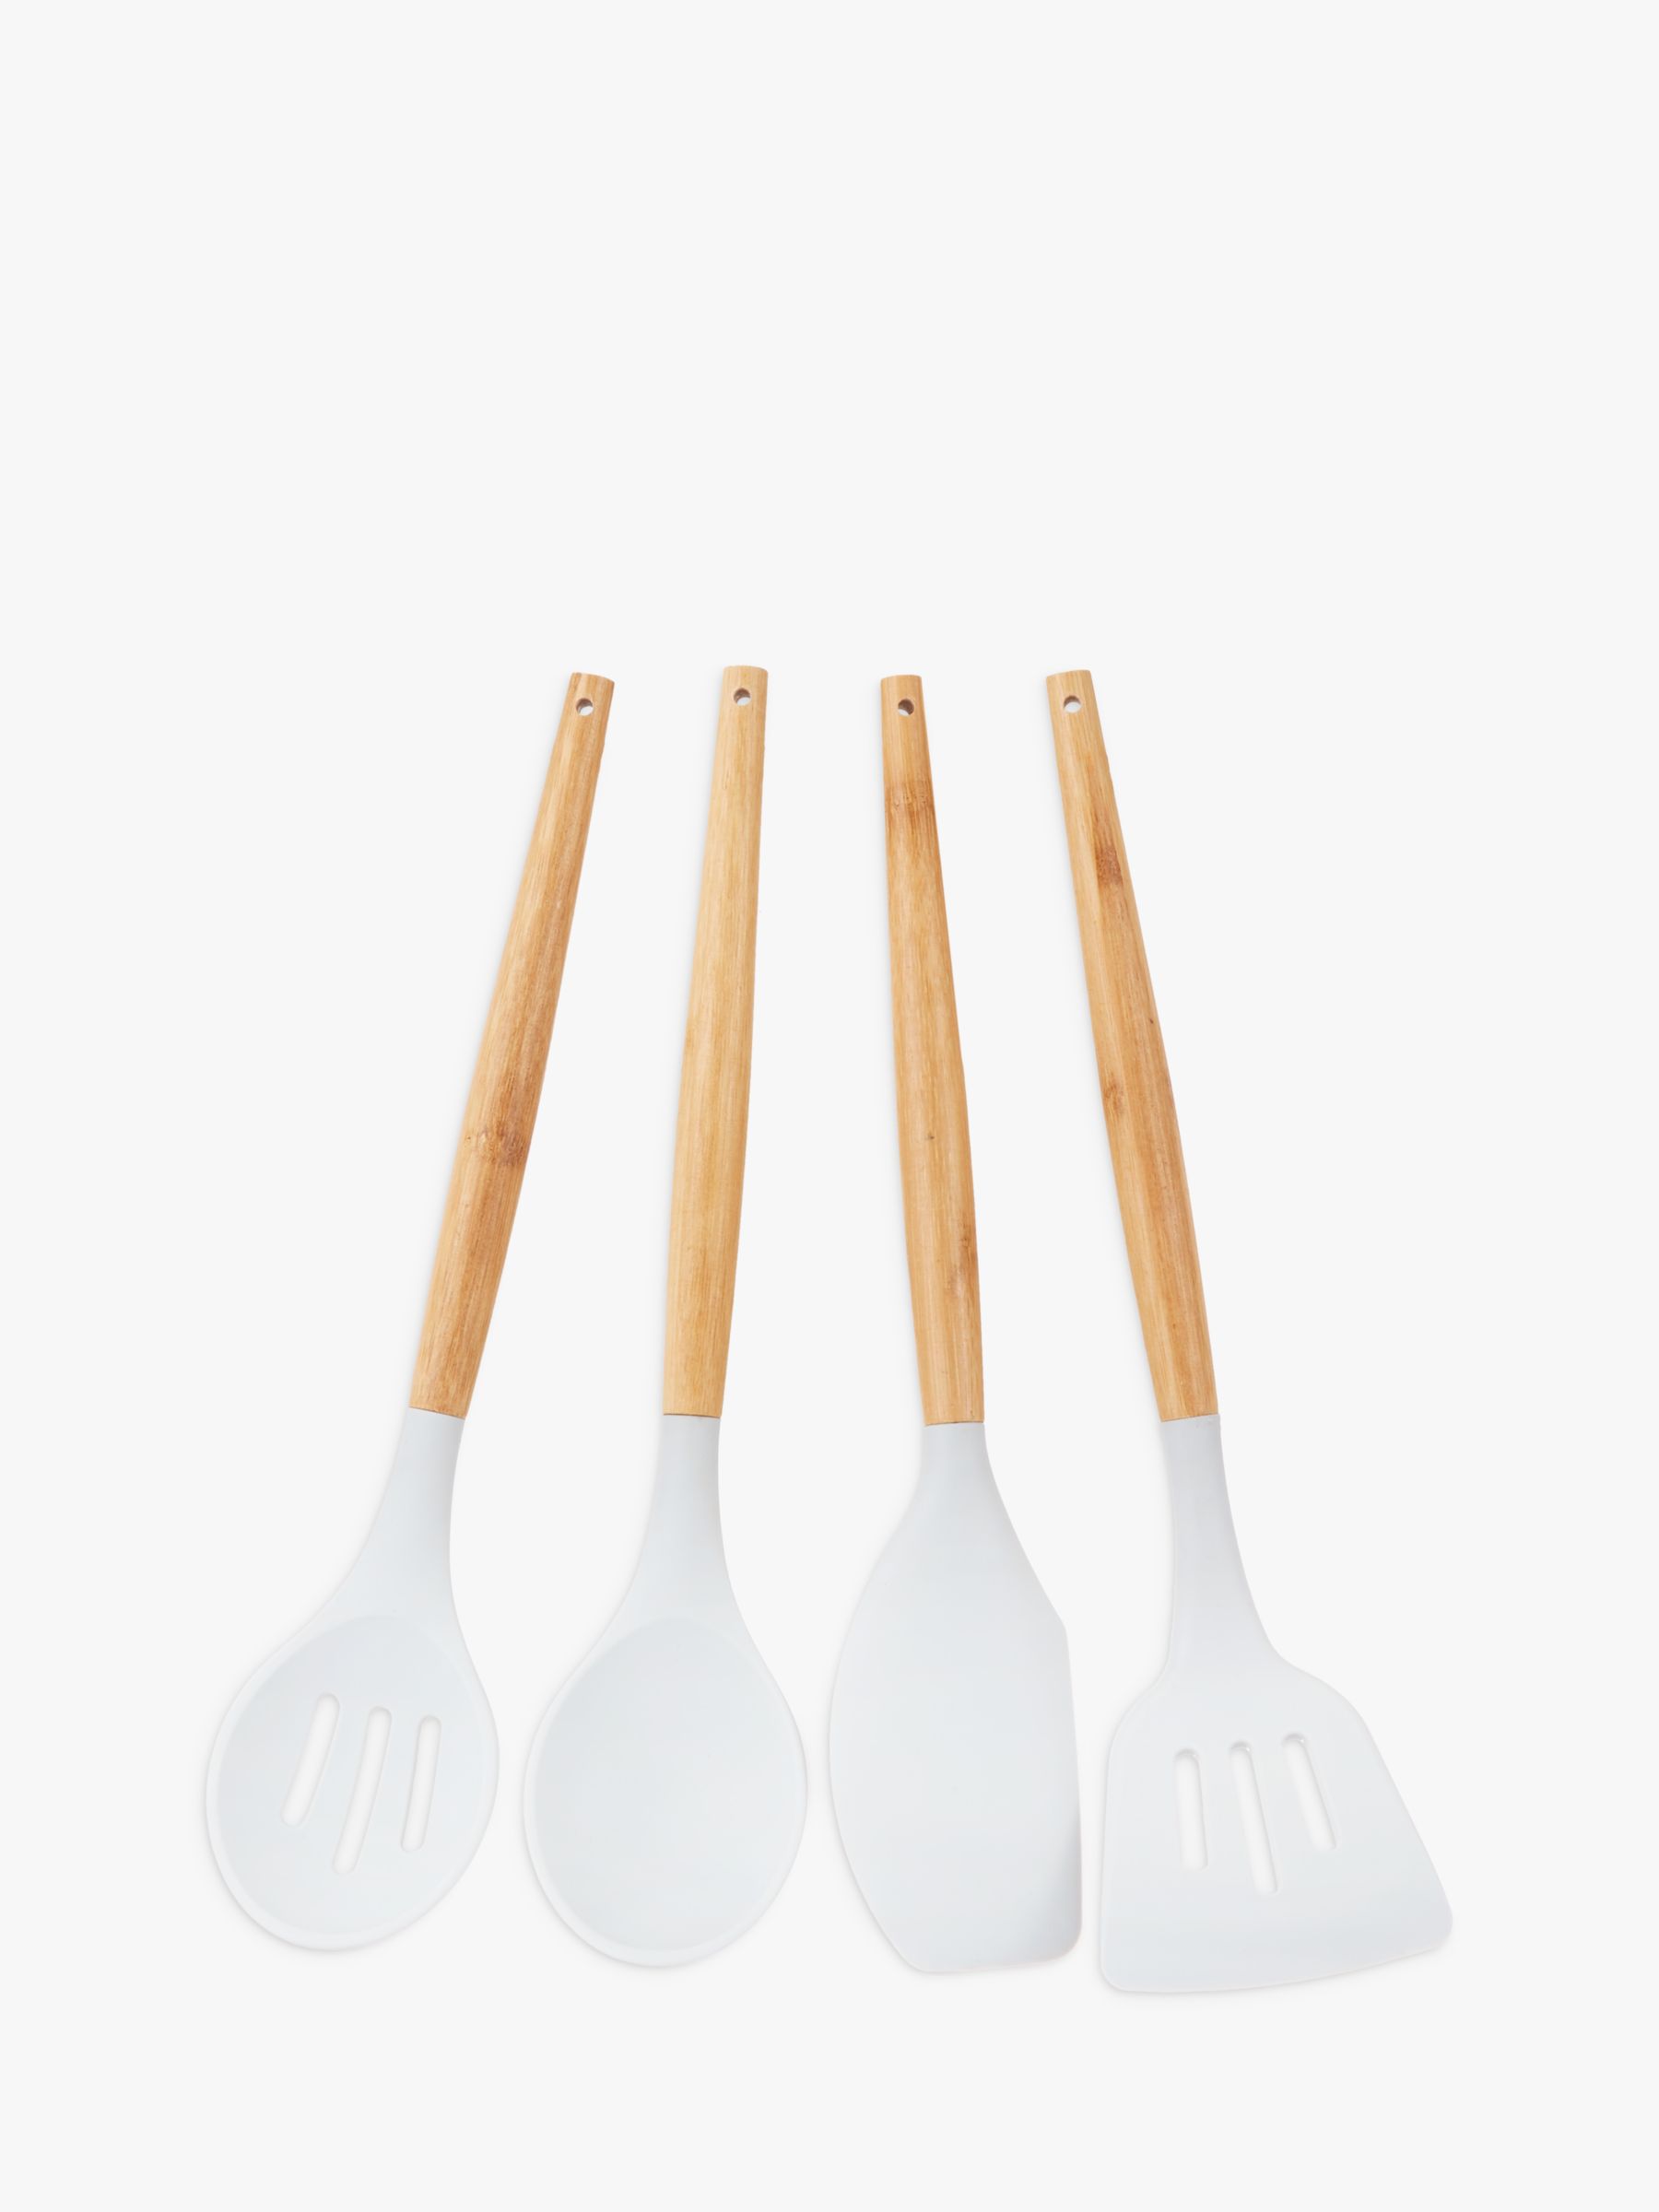 John Lewis & Partners Kitchen Utensils, Bamboo and Silicone, Set of 4